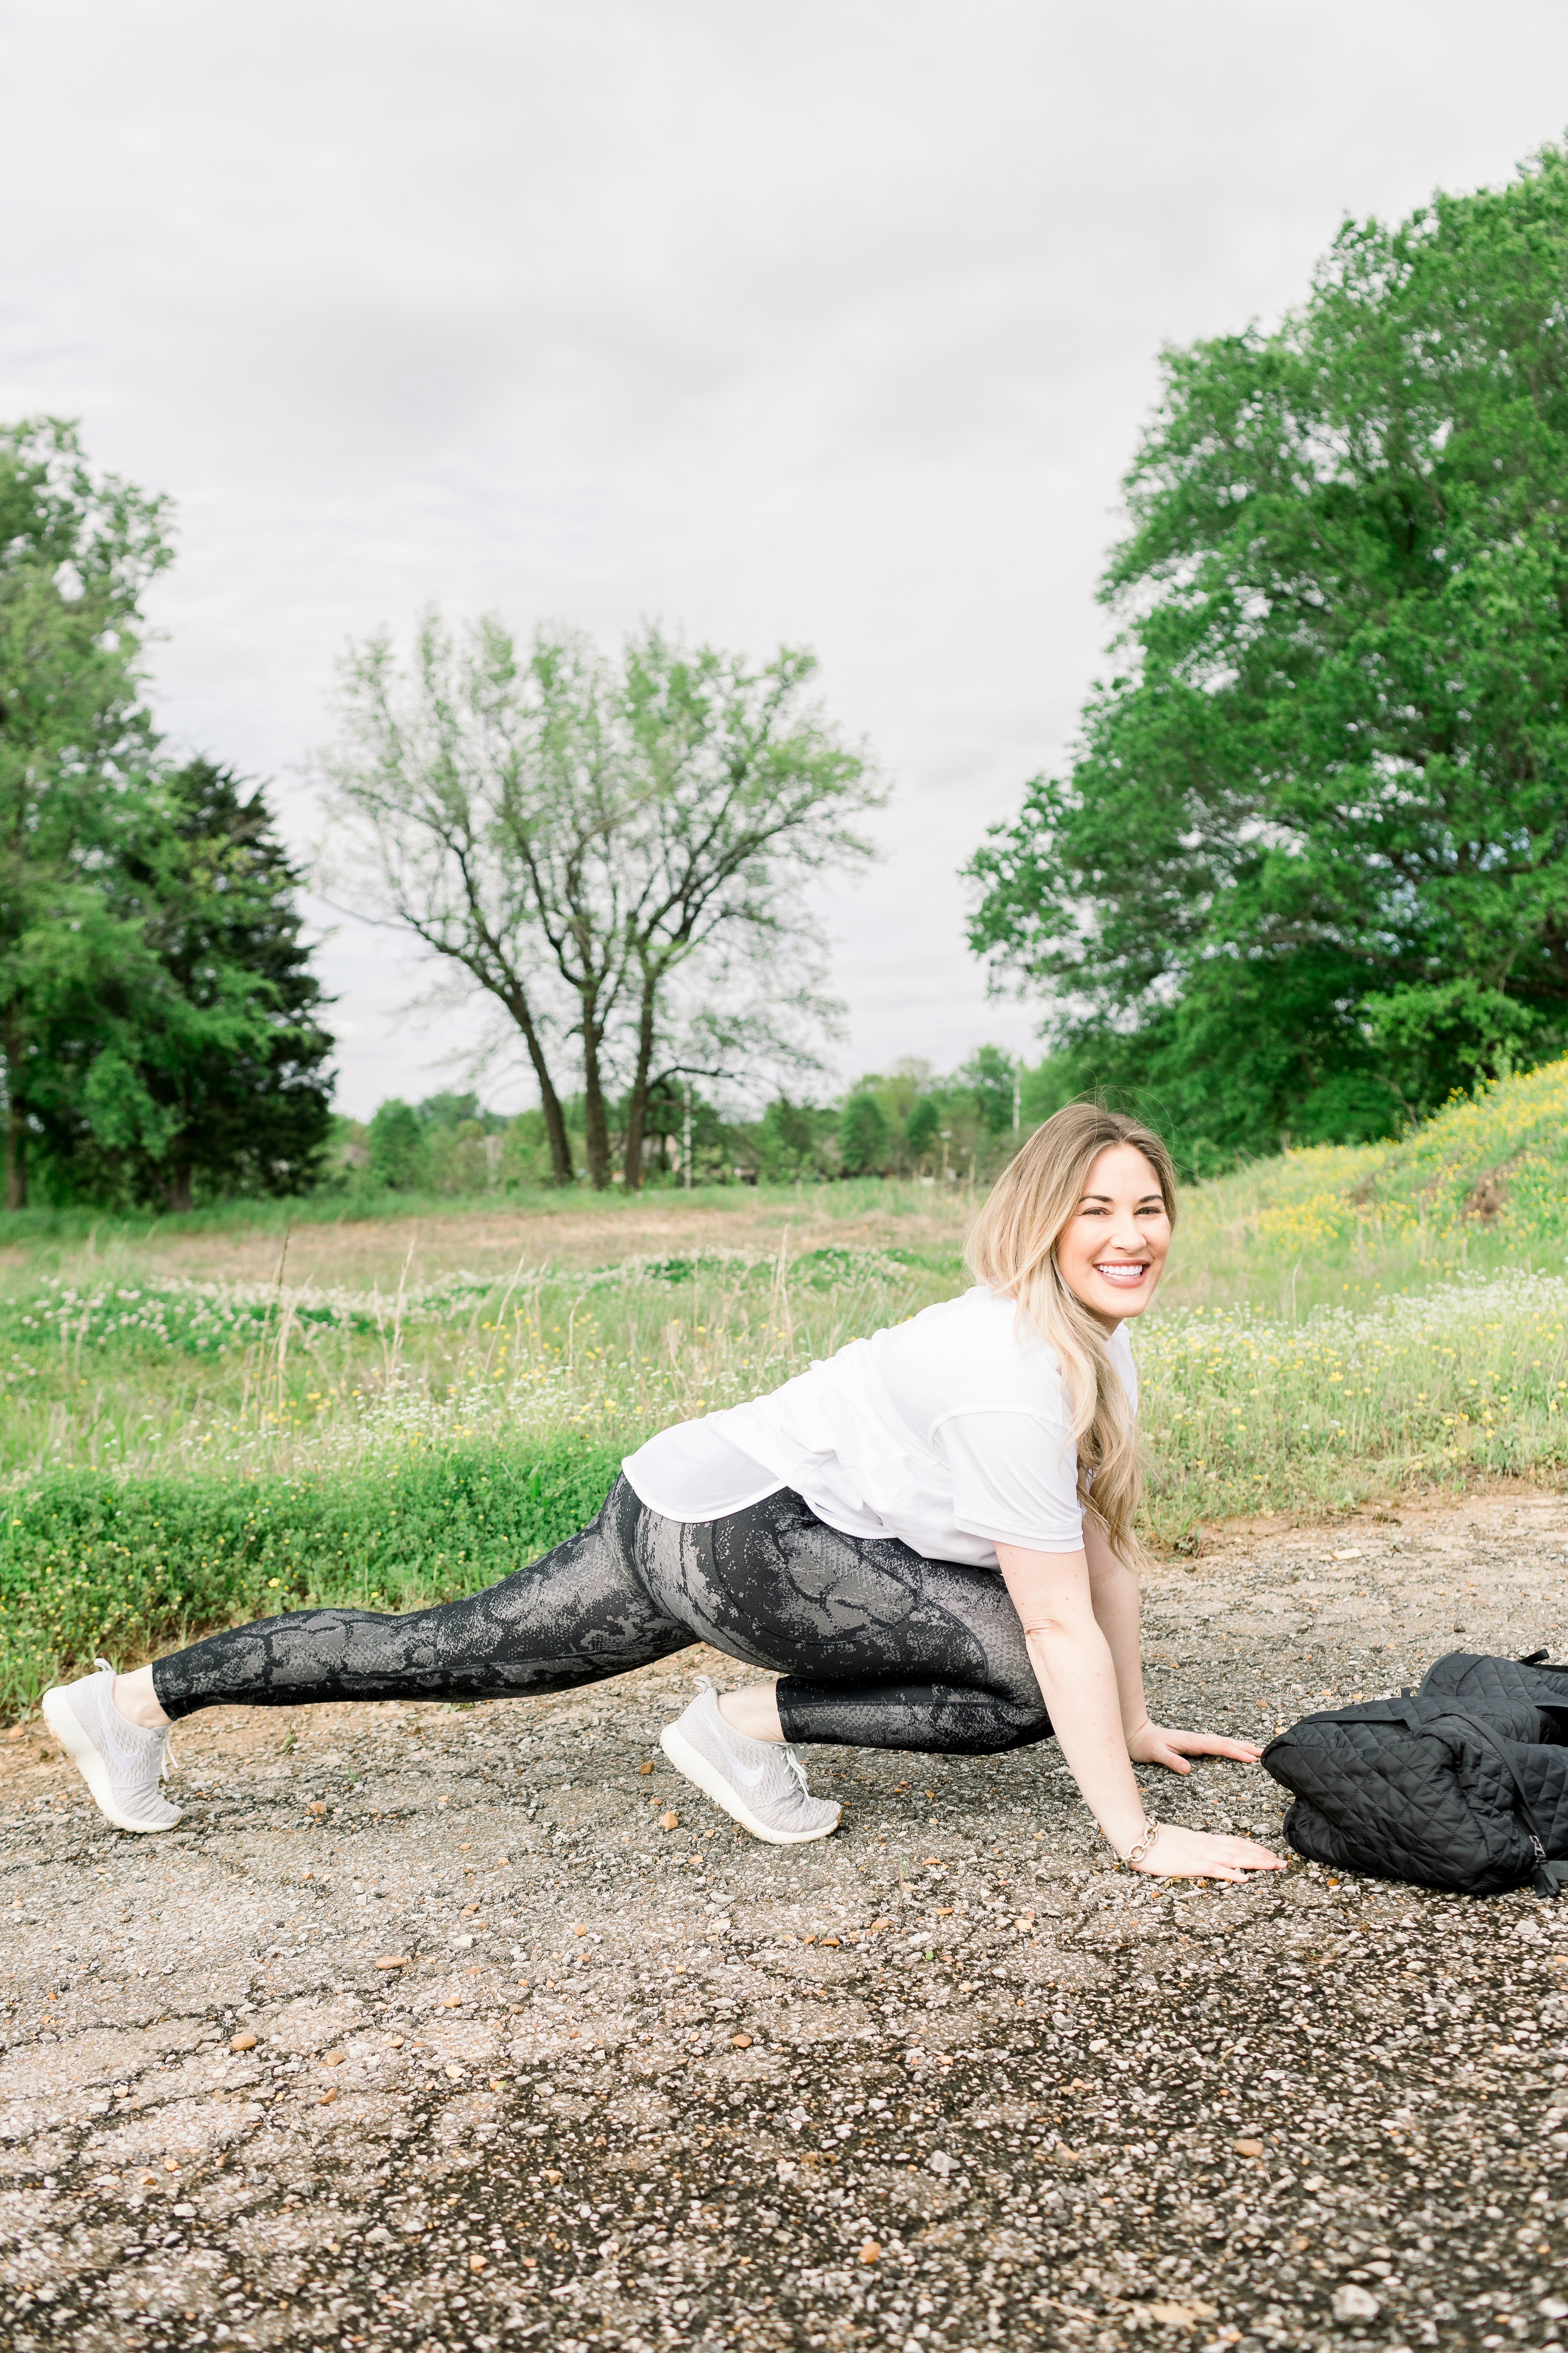 Spring athleisure  favorites featured by top Memphis fitness blog, Walking in Memphis in High Heels: image of a woman wearing Calia by Carrie Underwood leggings, Calia by Carrie Underwood t-shirt, and Nike Roshe One.